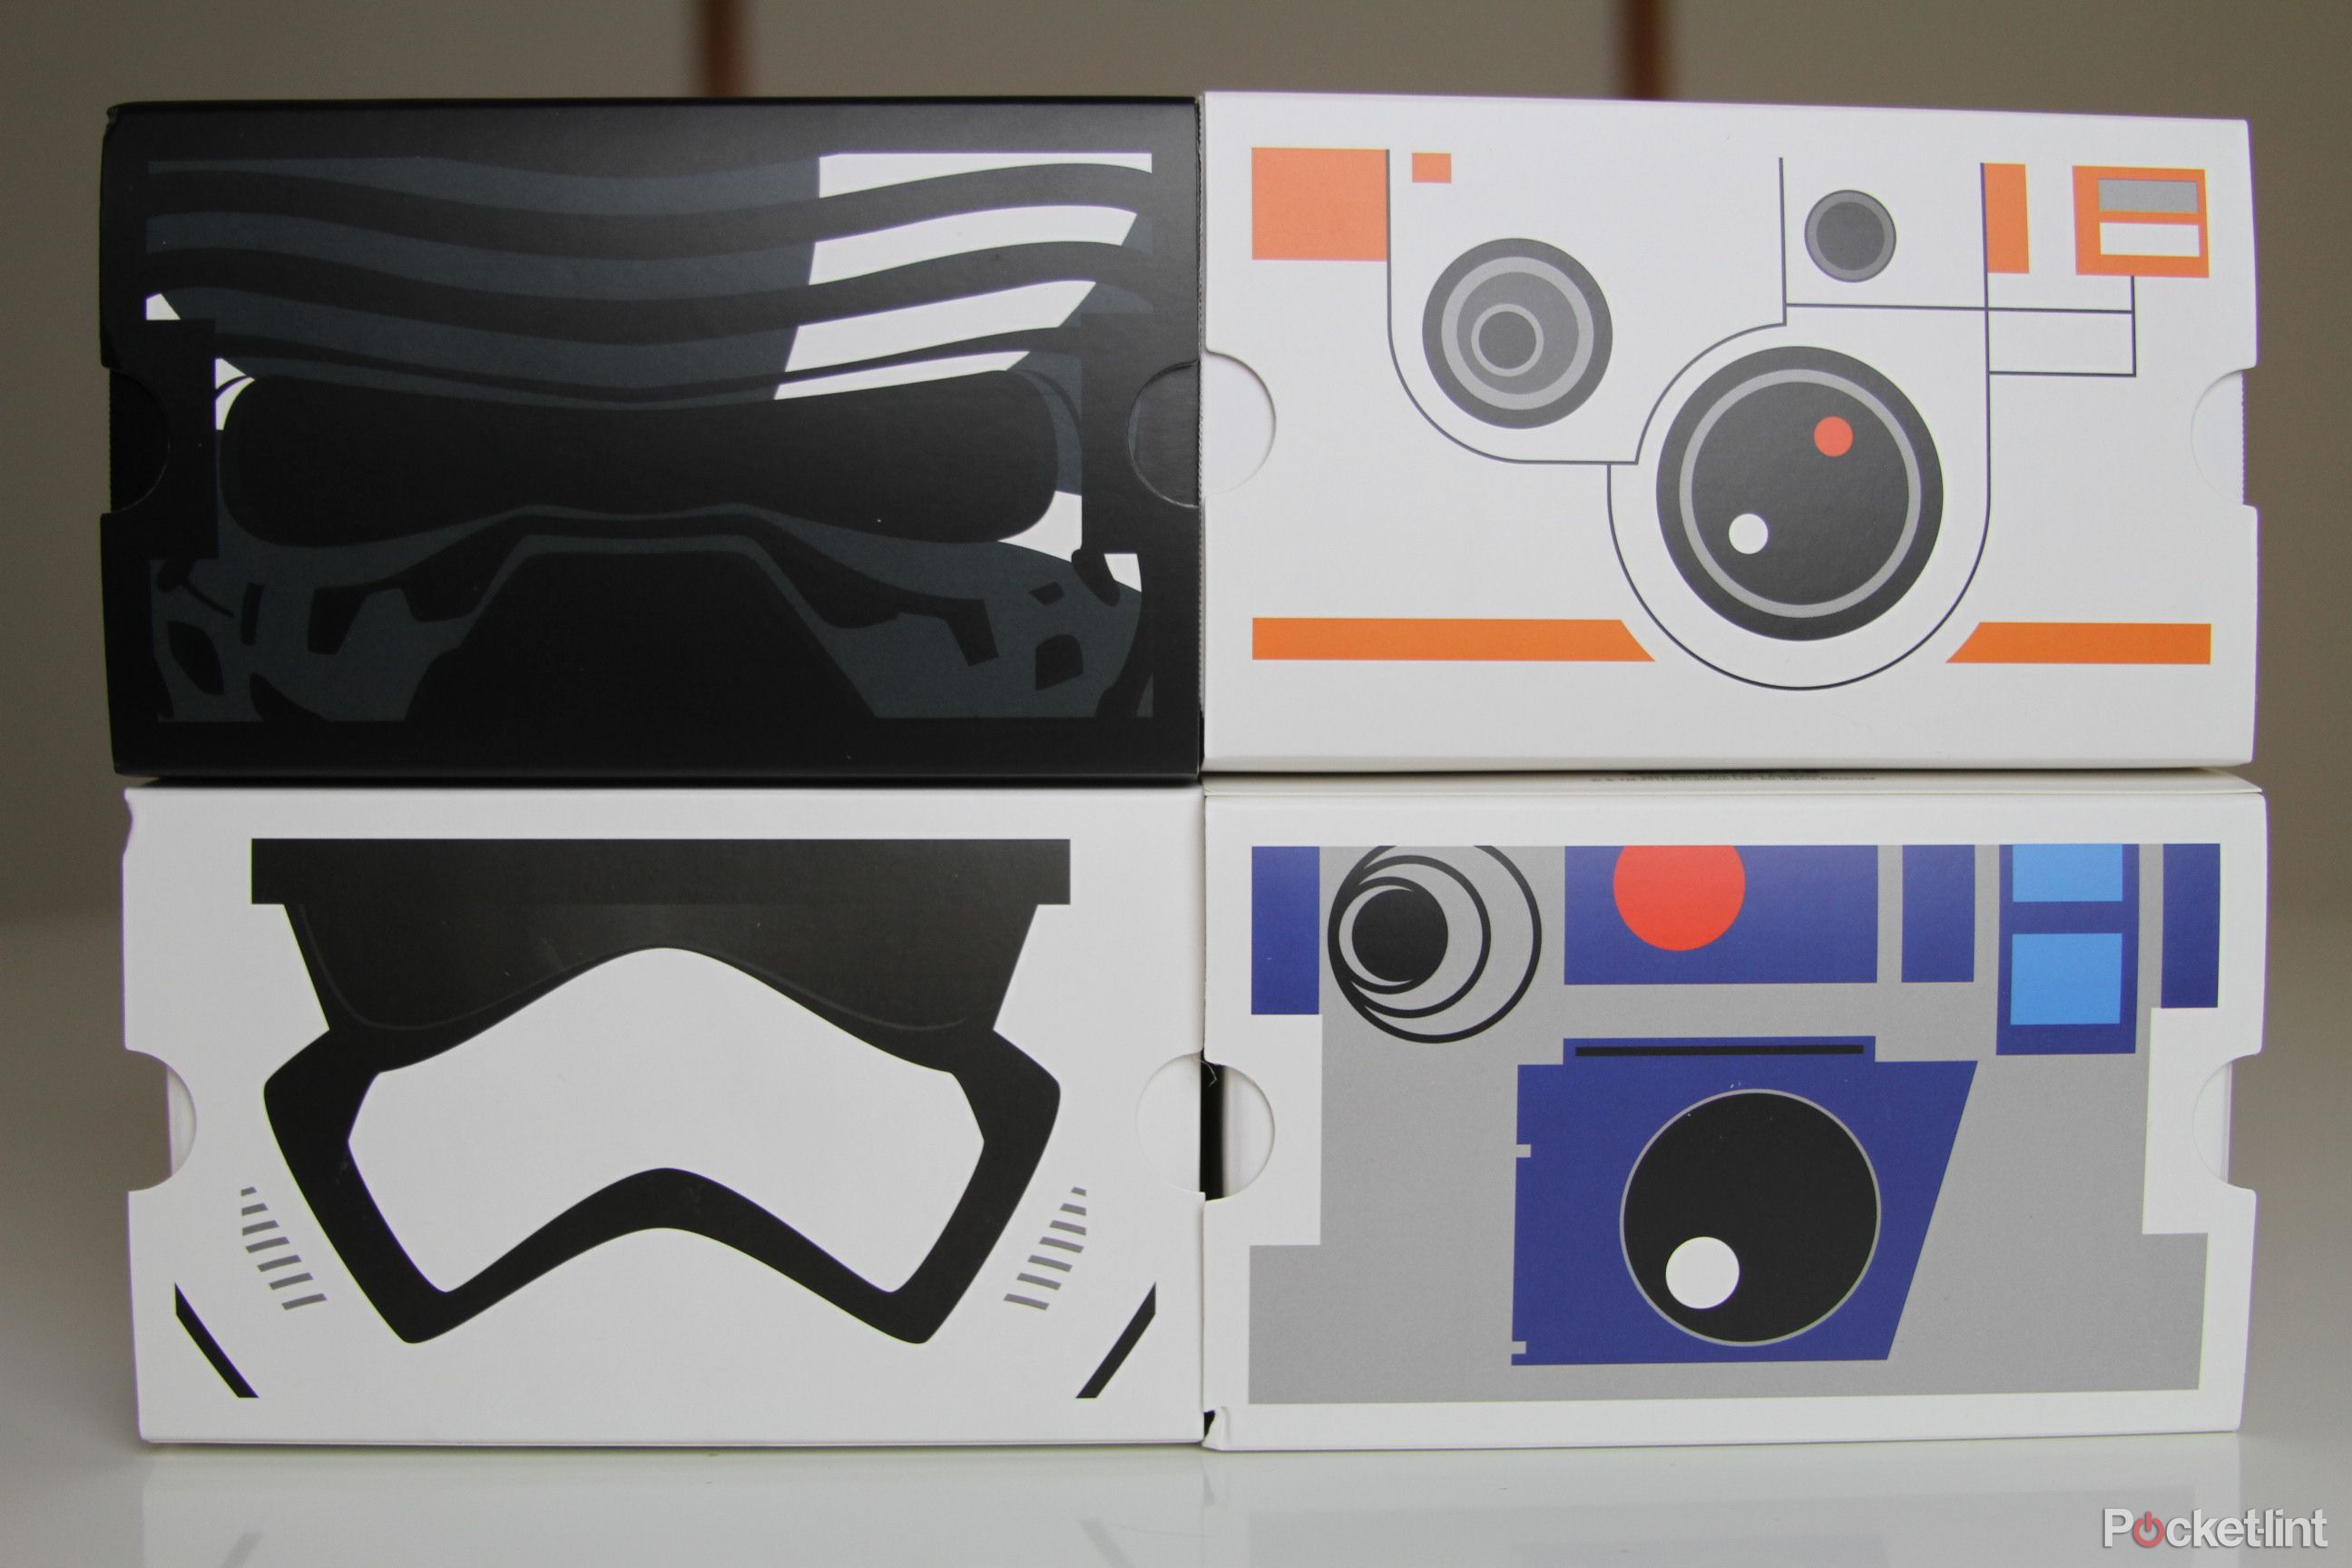 here are the star wars cardboard headsets image 1